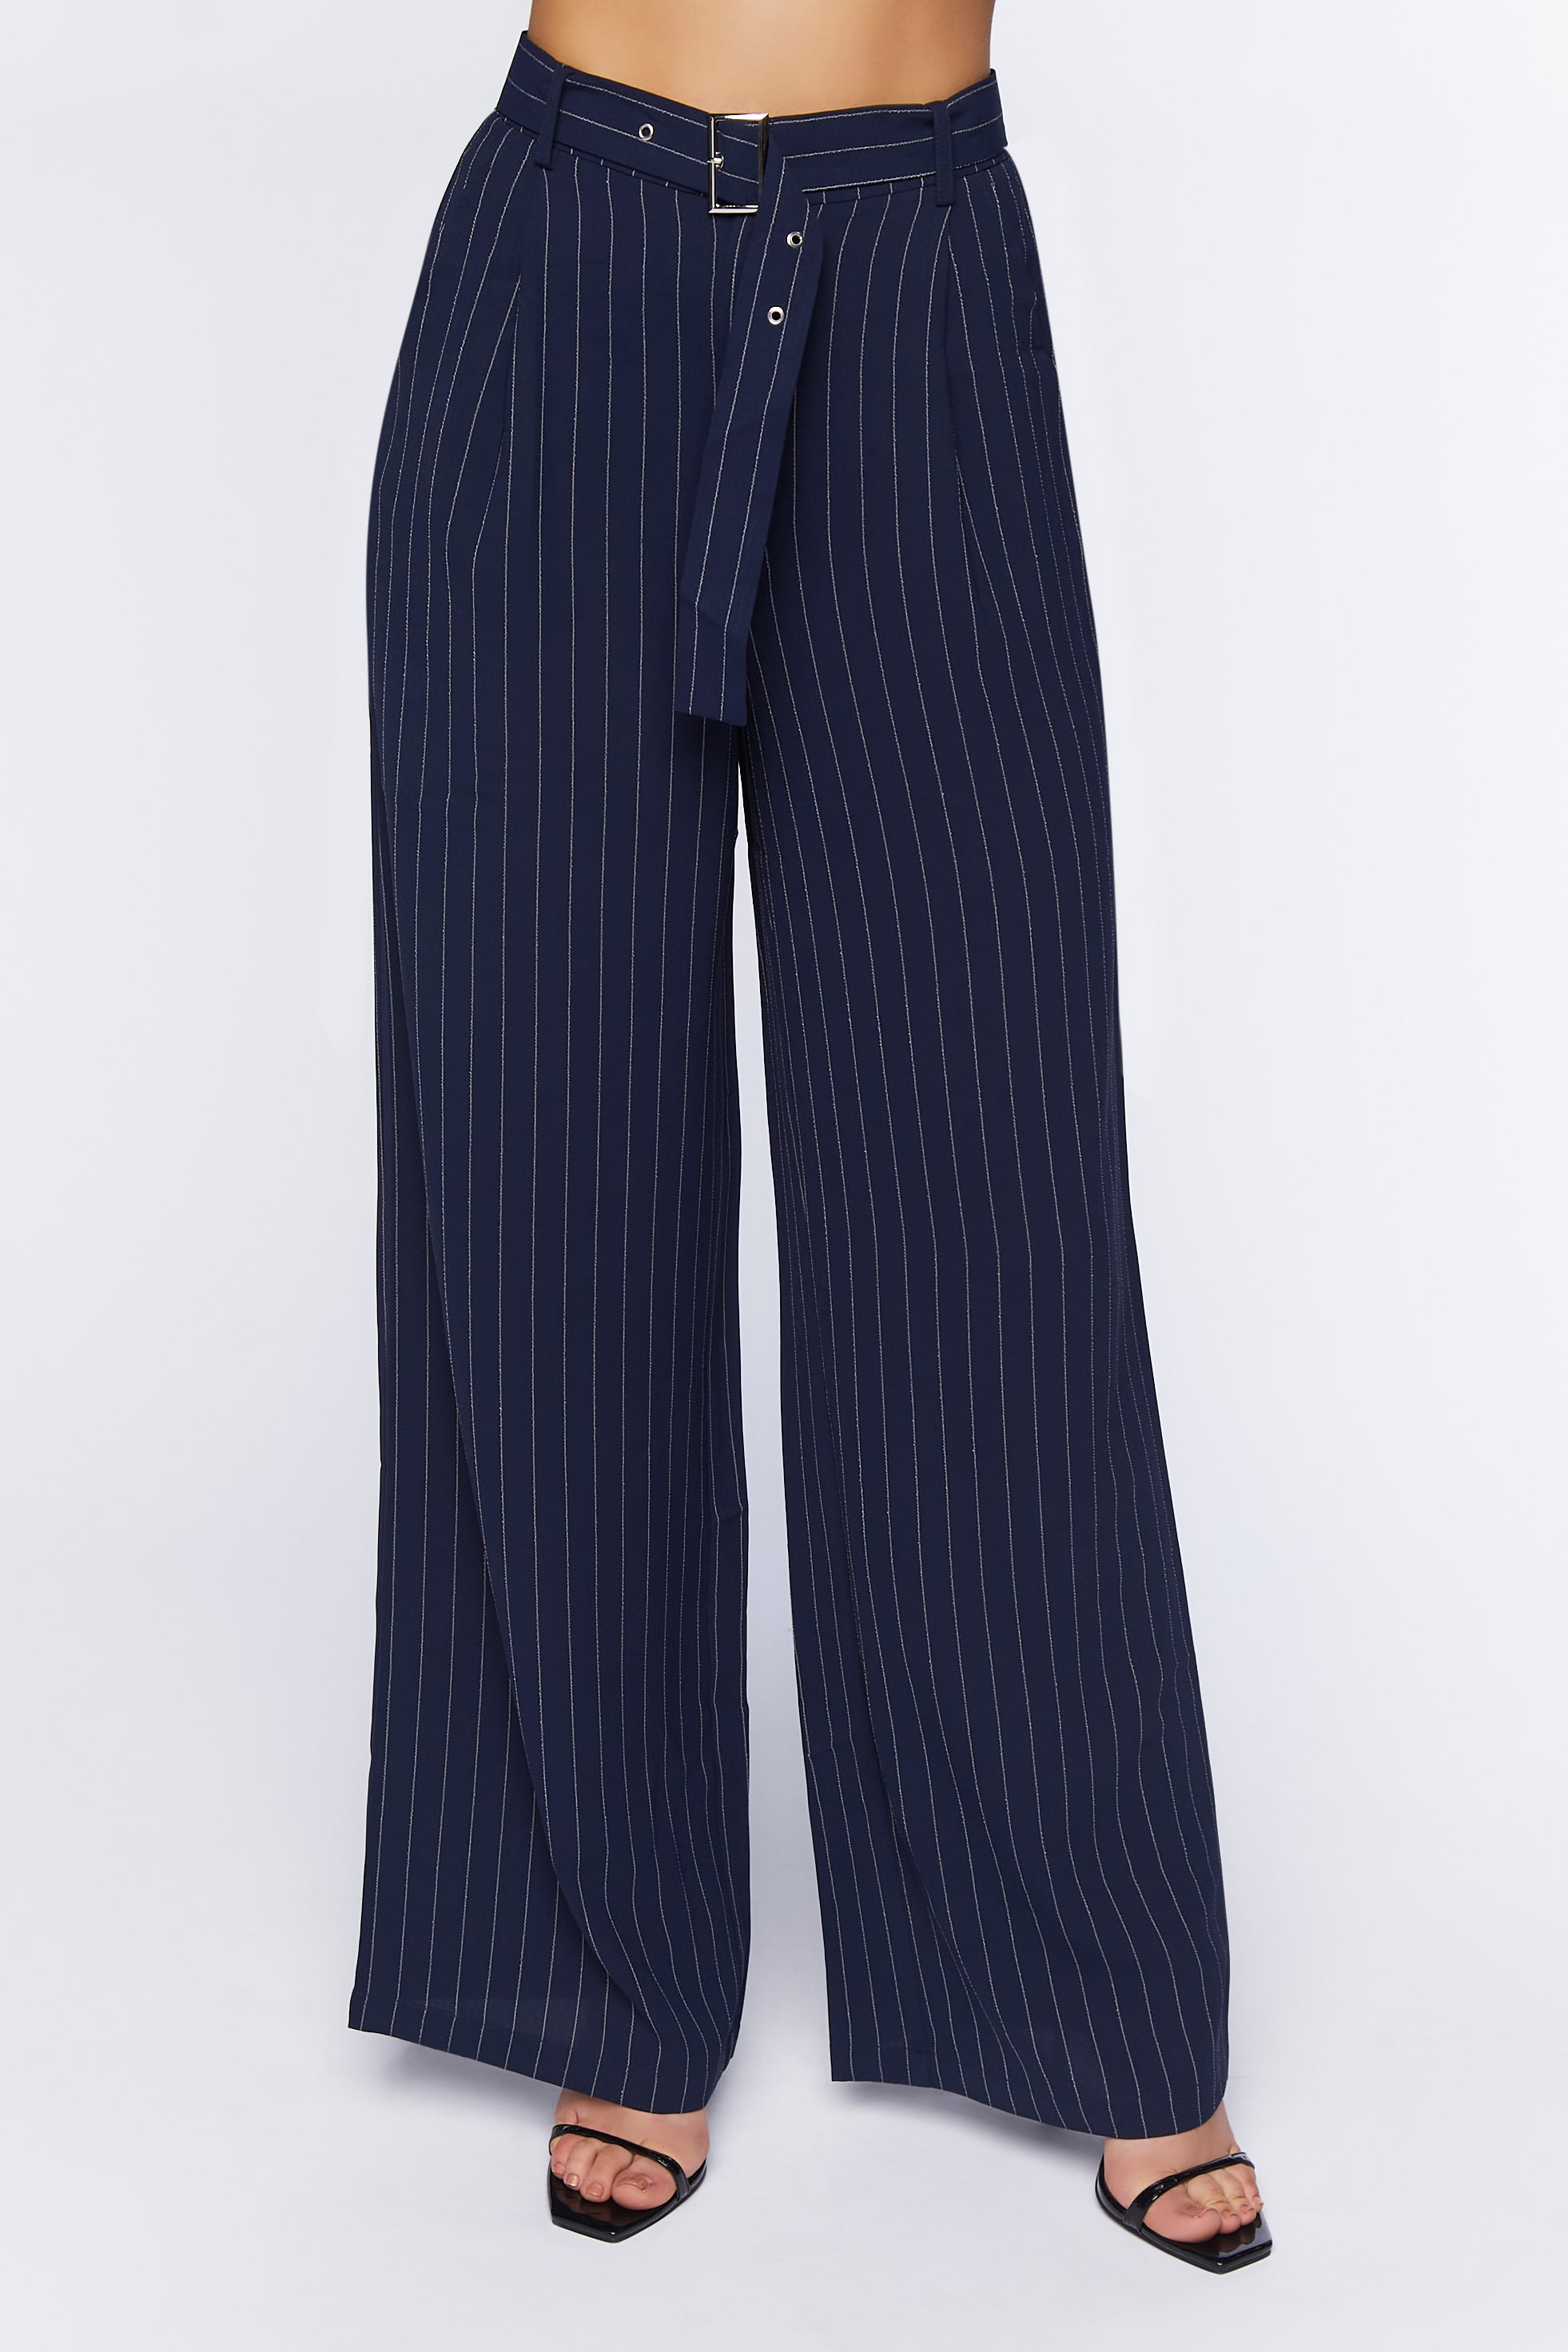 Navywhite Belted Pinstripe Trousers 1